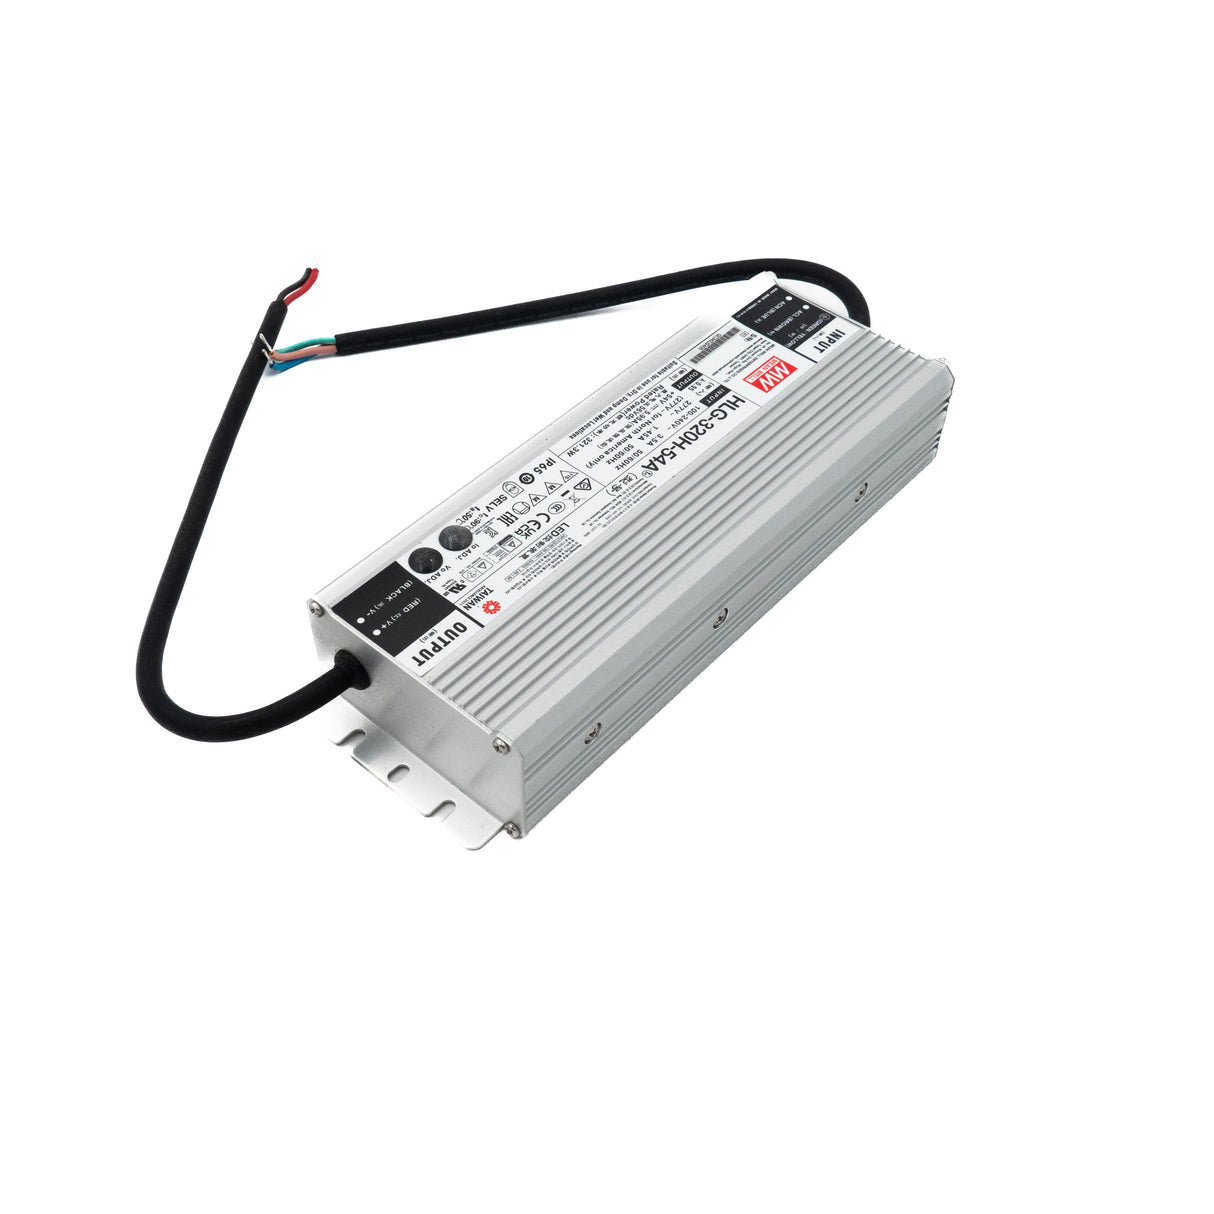 Mean Well HLG-320H-54A Power Supply 320W 54V - Adjustable - PHOTO 2